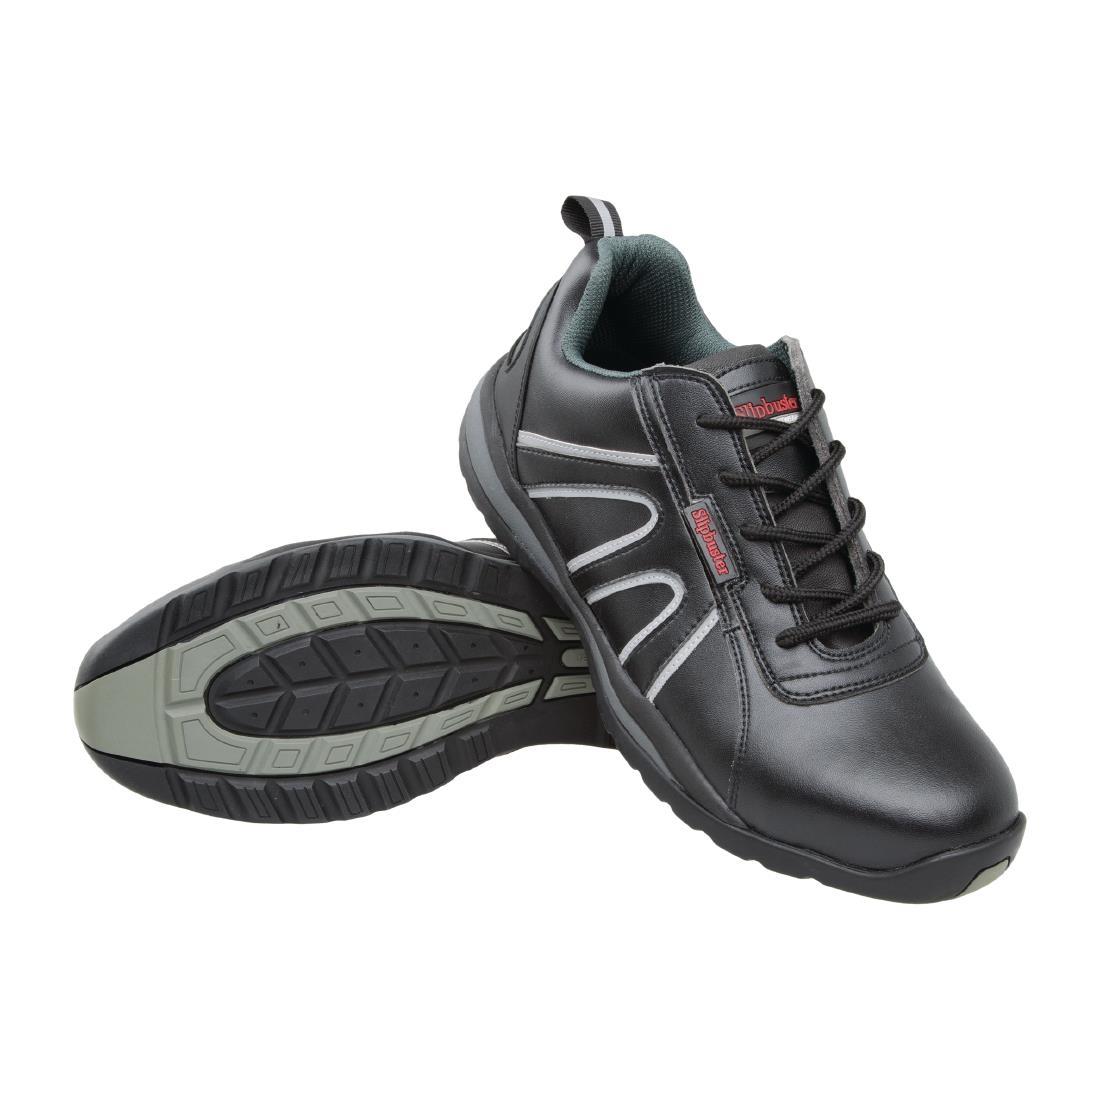 Slipbuster Safety Trainers Black 43 - A708-43  - 2